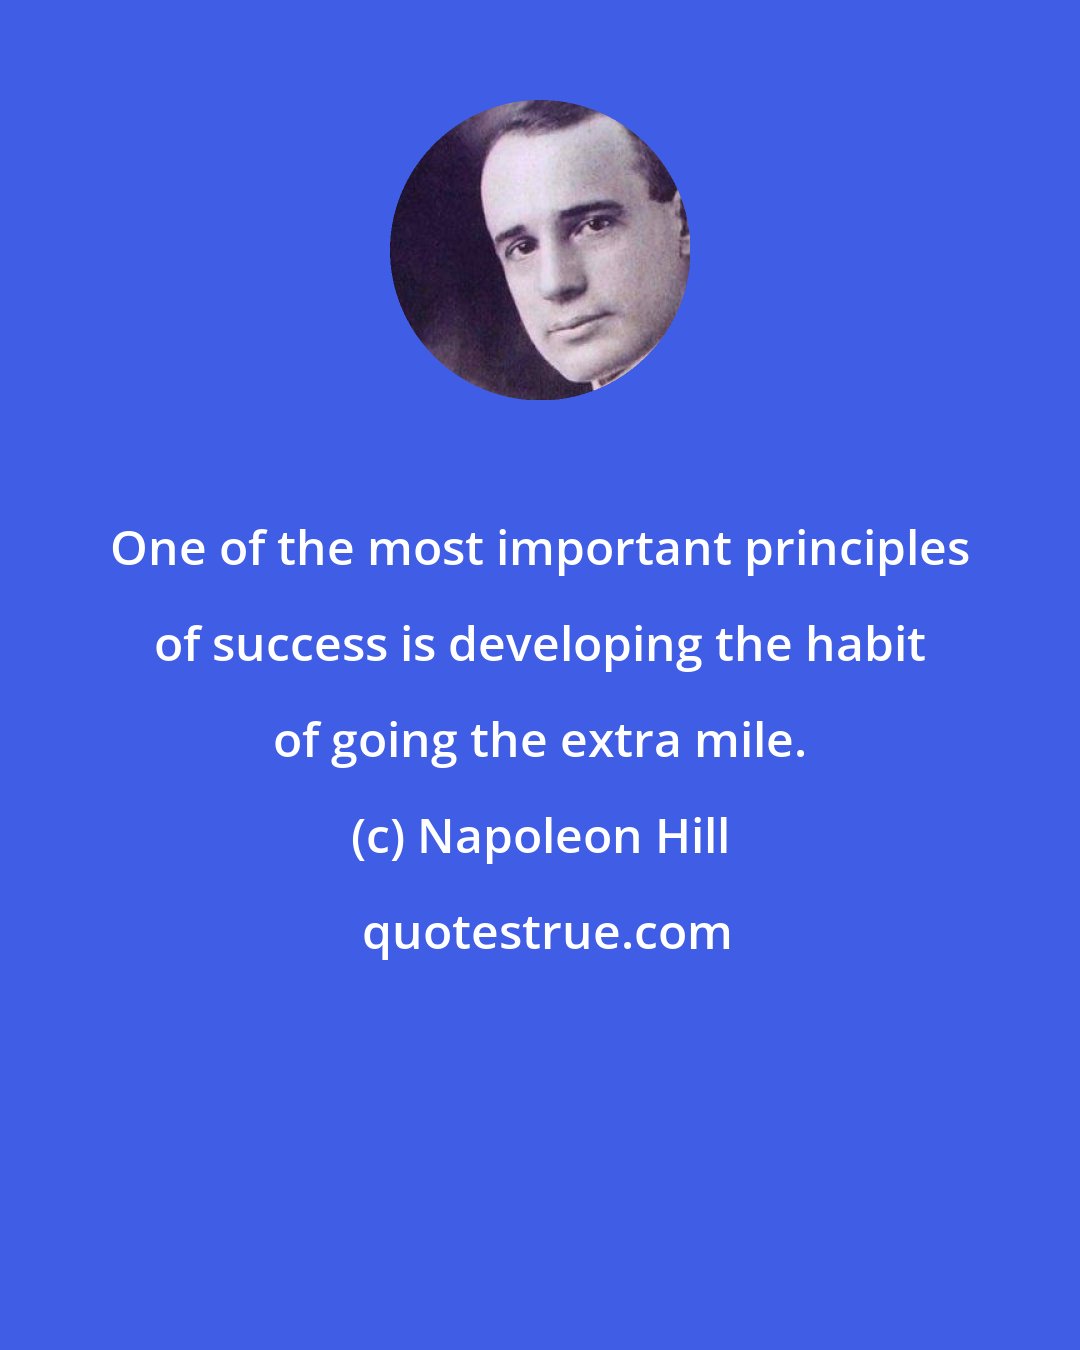 Napoleon Hill: One of the most important principles of success is developing the habit of going the extra mile.